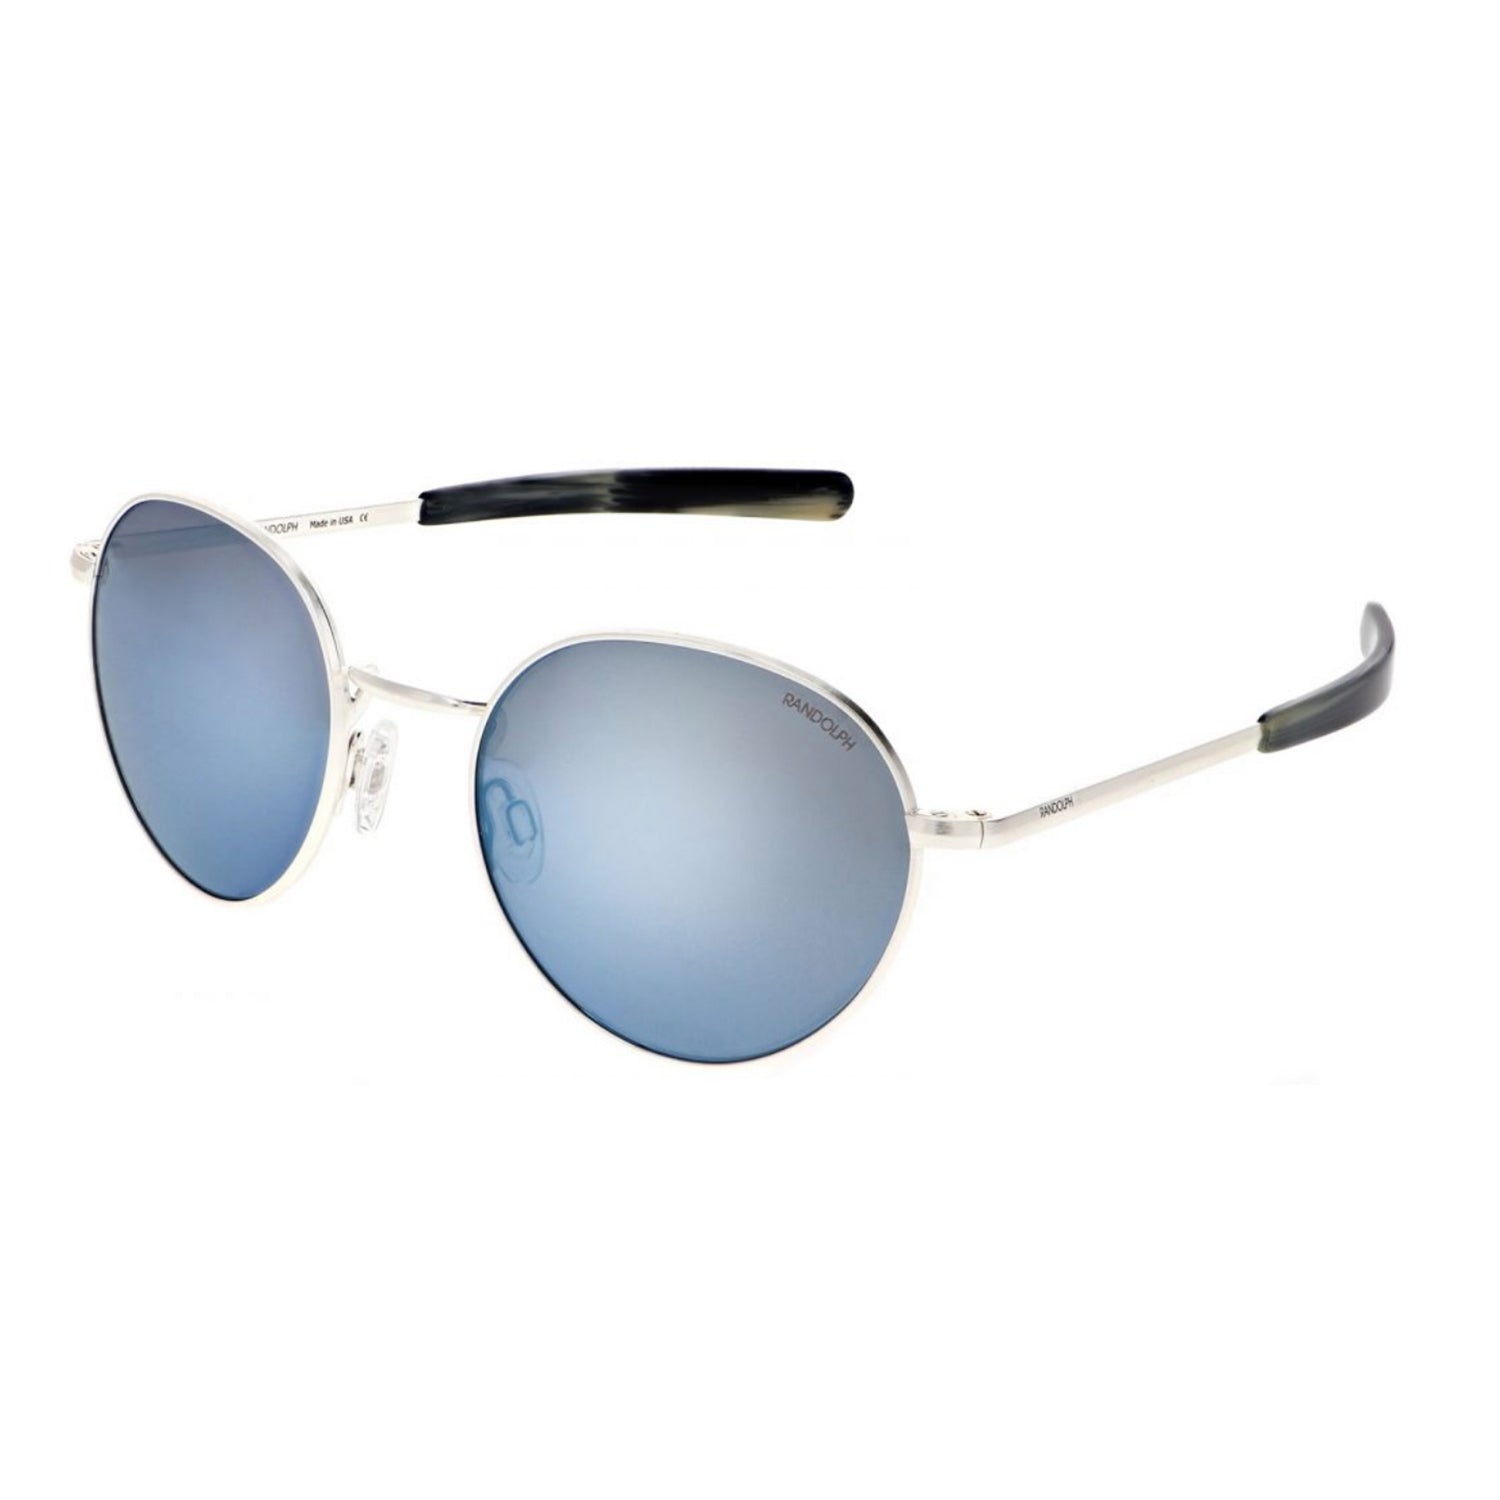 Douglas Sunglasses, Satin Silver Frames with Mystic Blue Lenses by Randolph - Talisman Collection Fine Jewelers